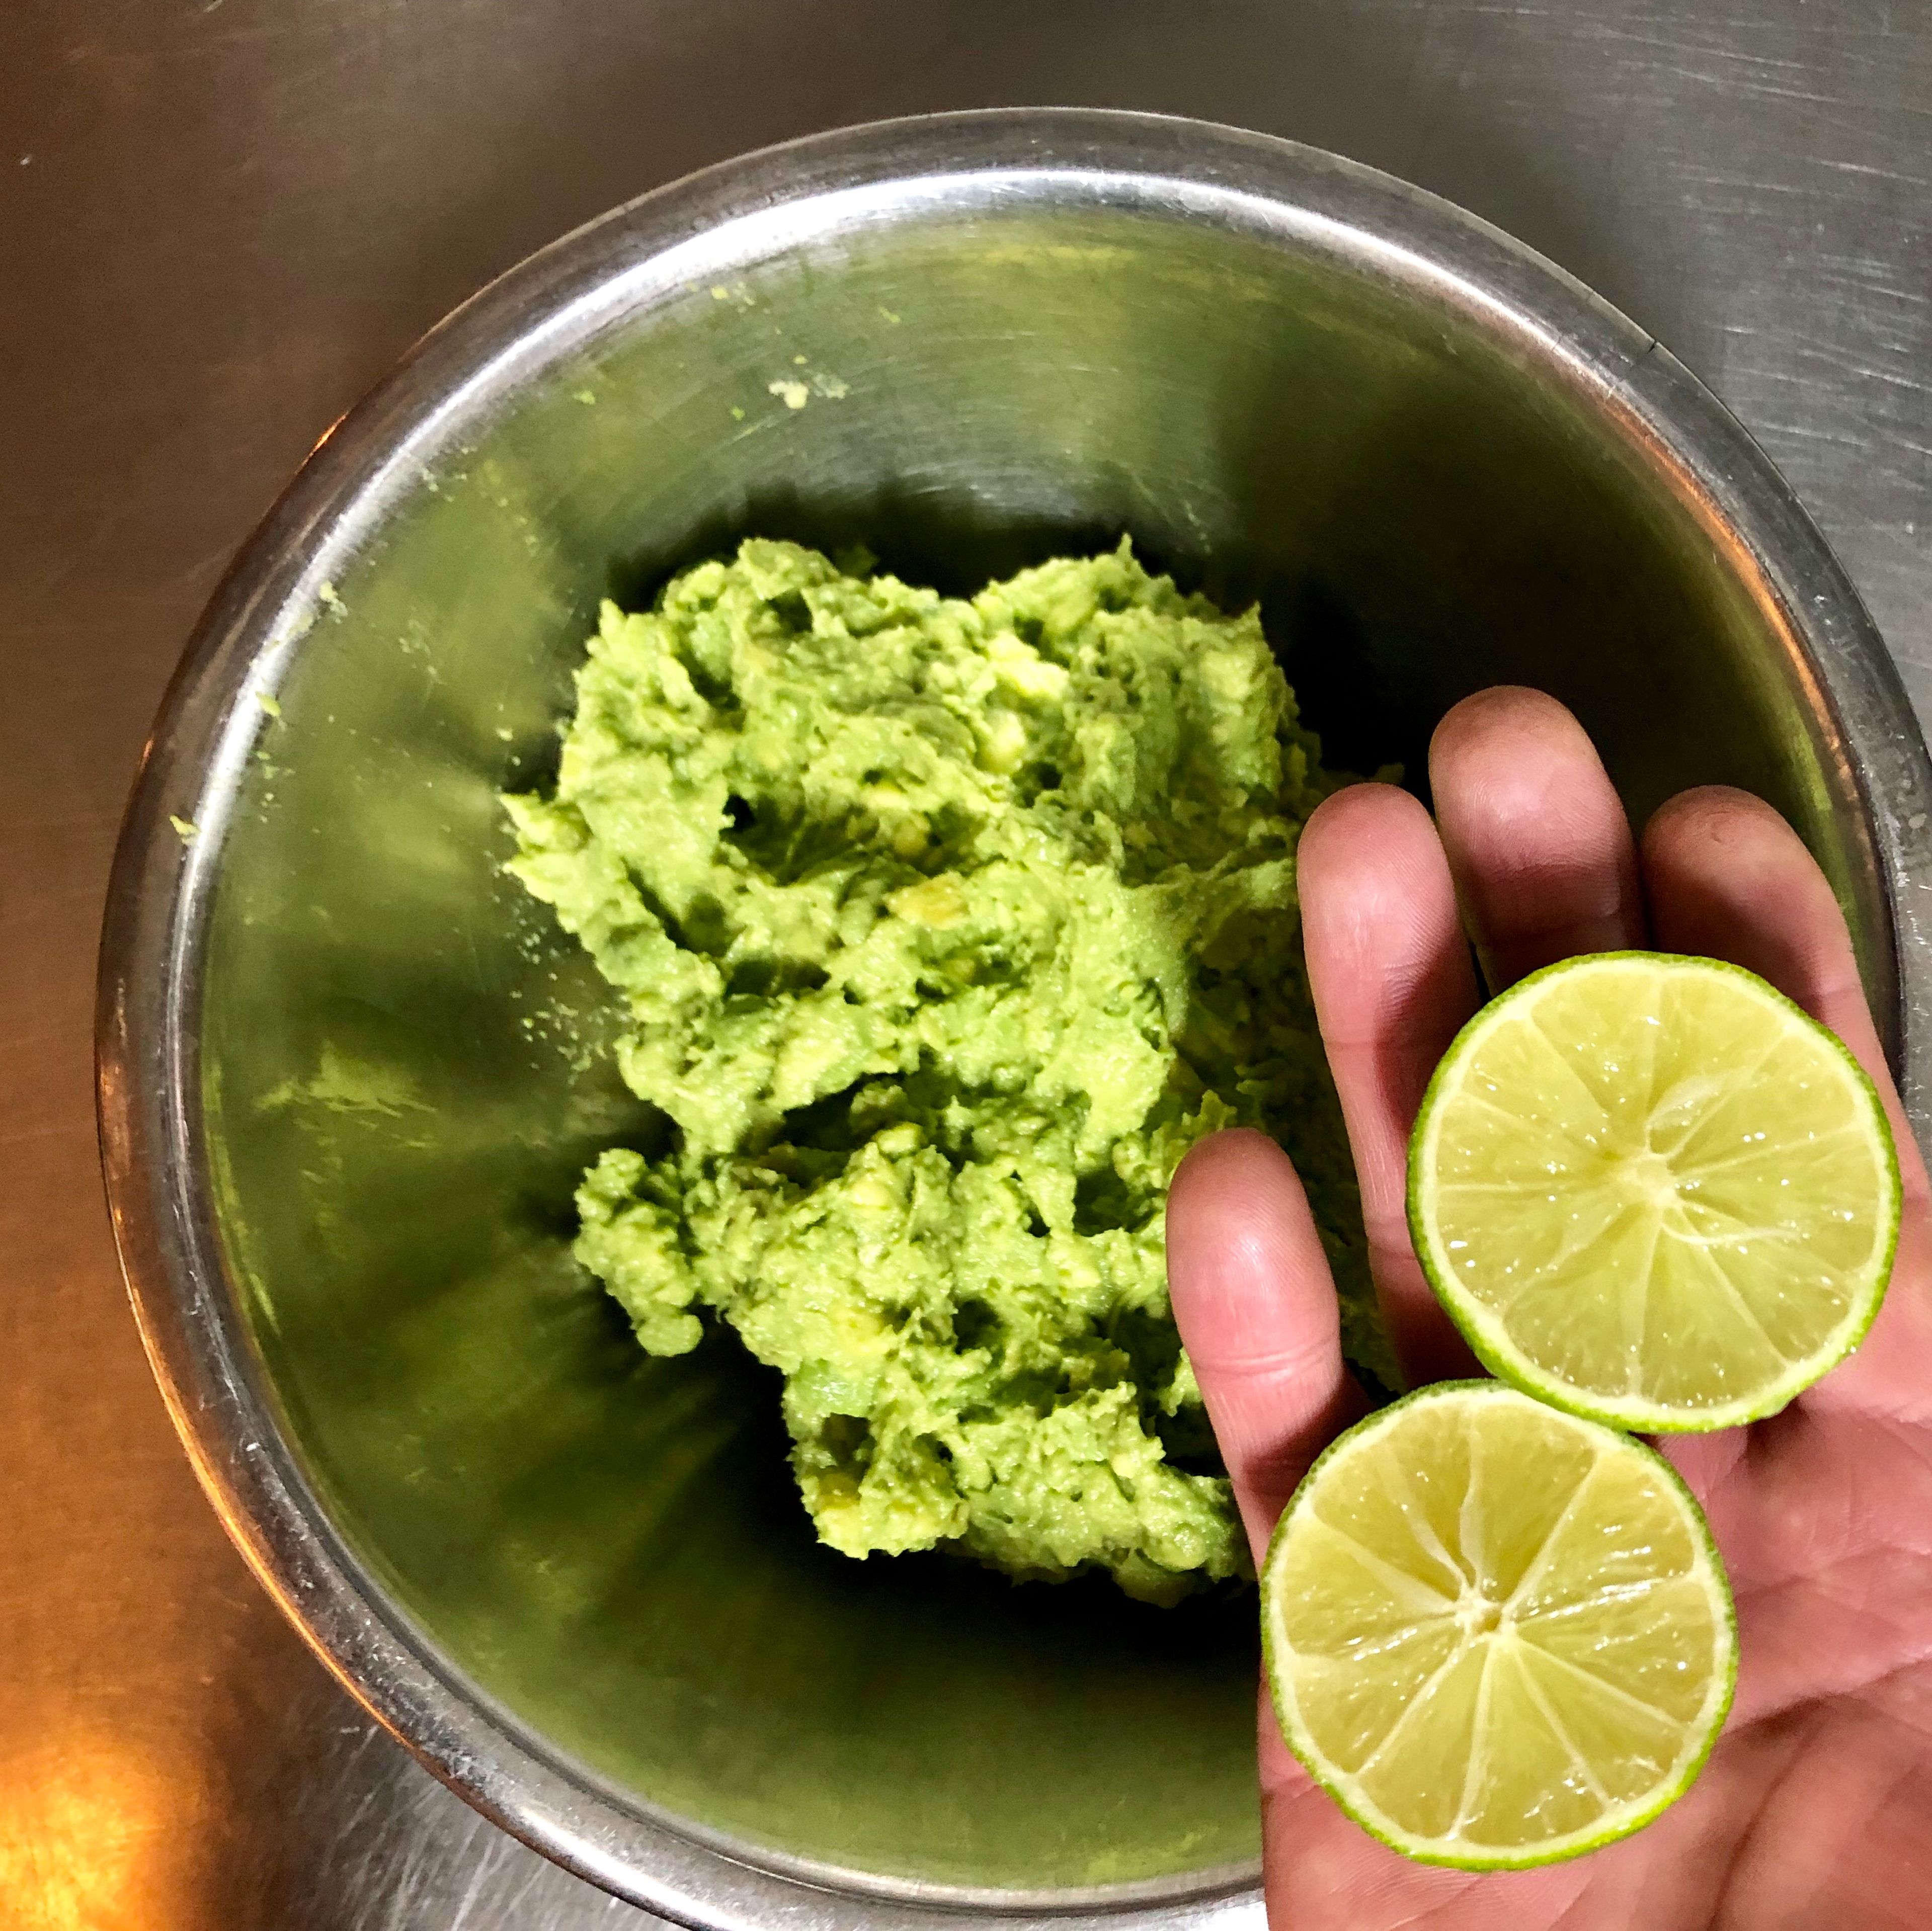 Cut the lime in half and squeeze the juice into the bowl.